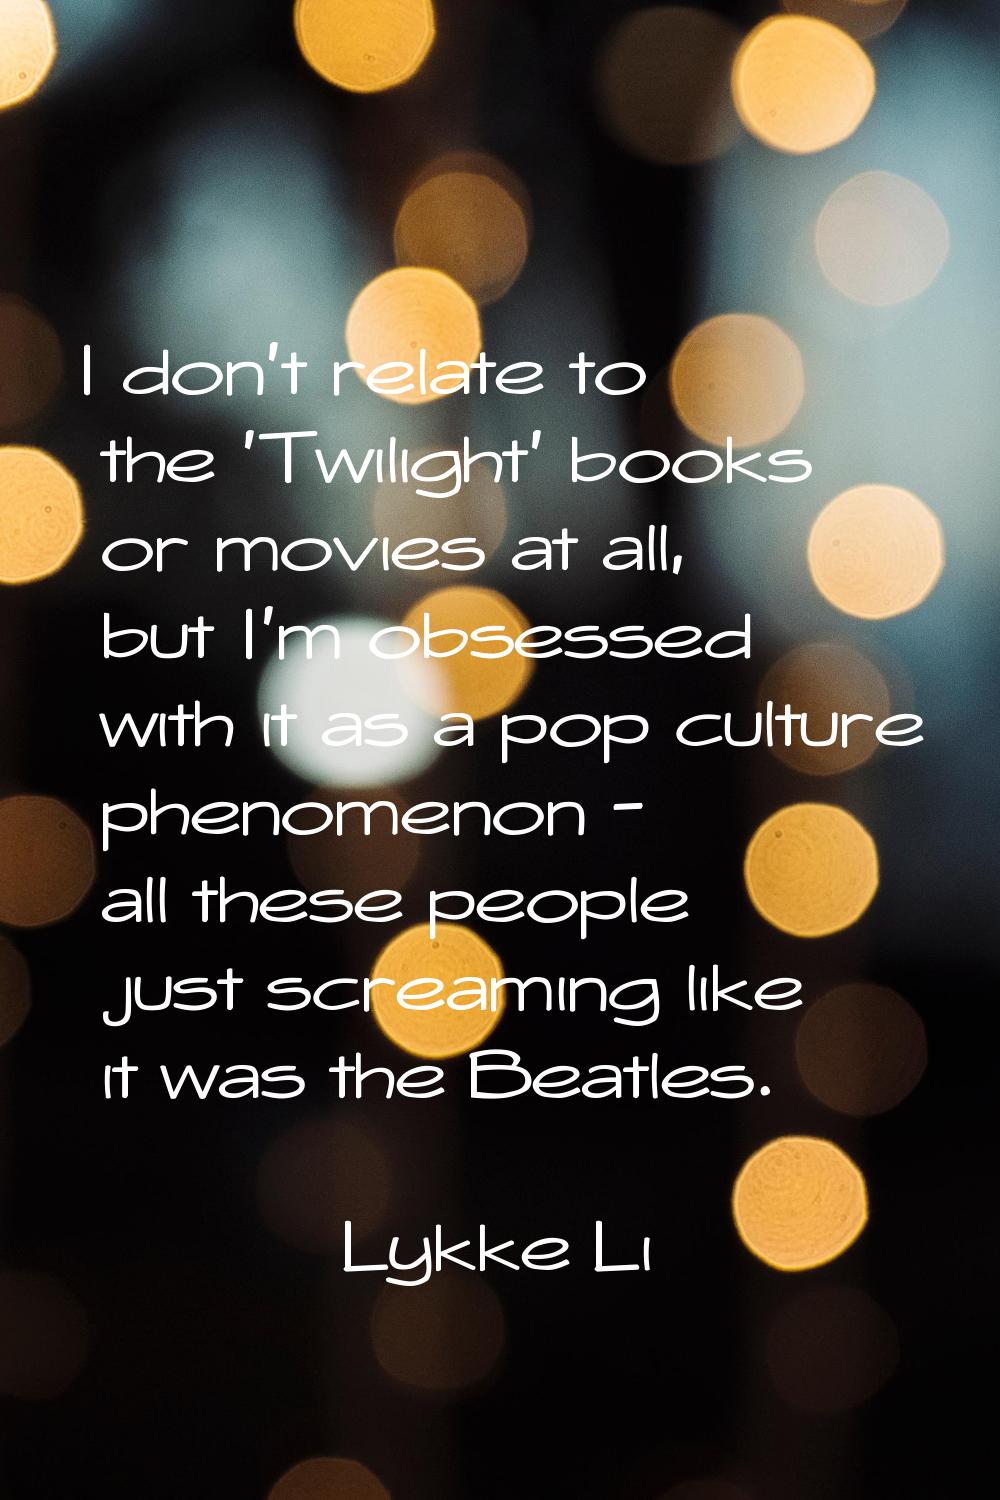 I don't relate to the 'Twilight' books or movies at all, but I'm obsessed with it as a pop culture 